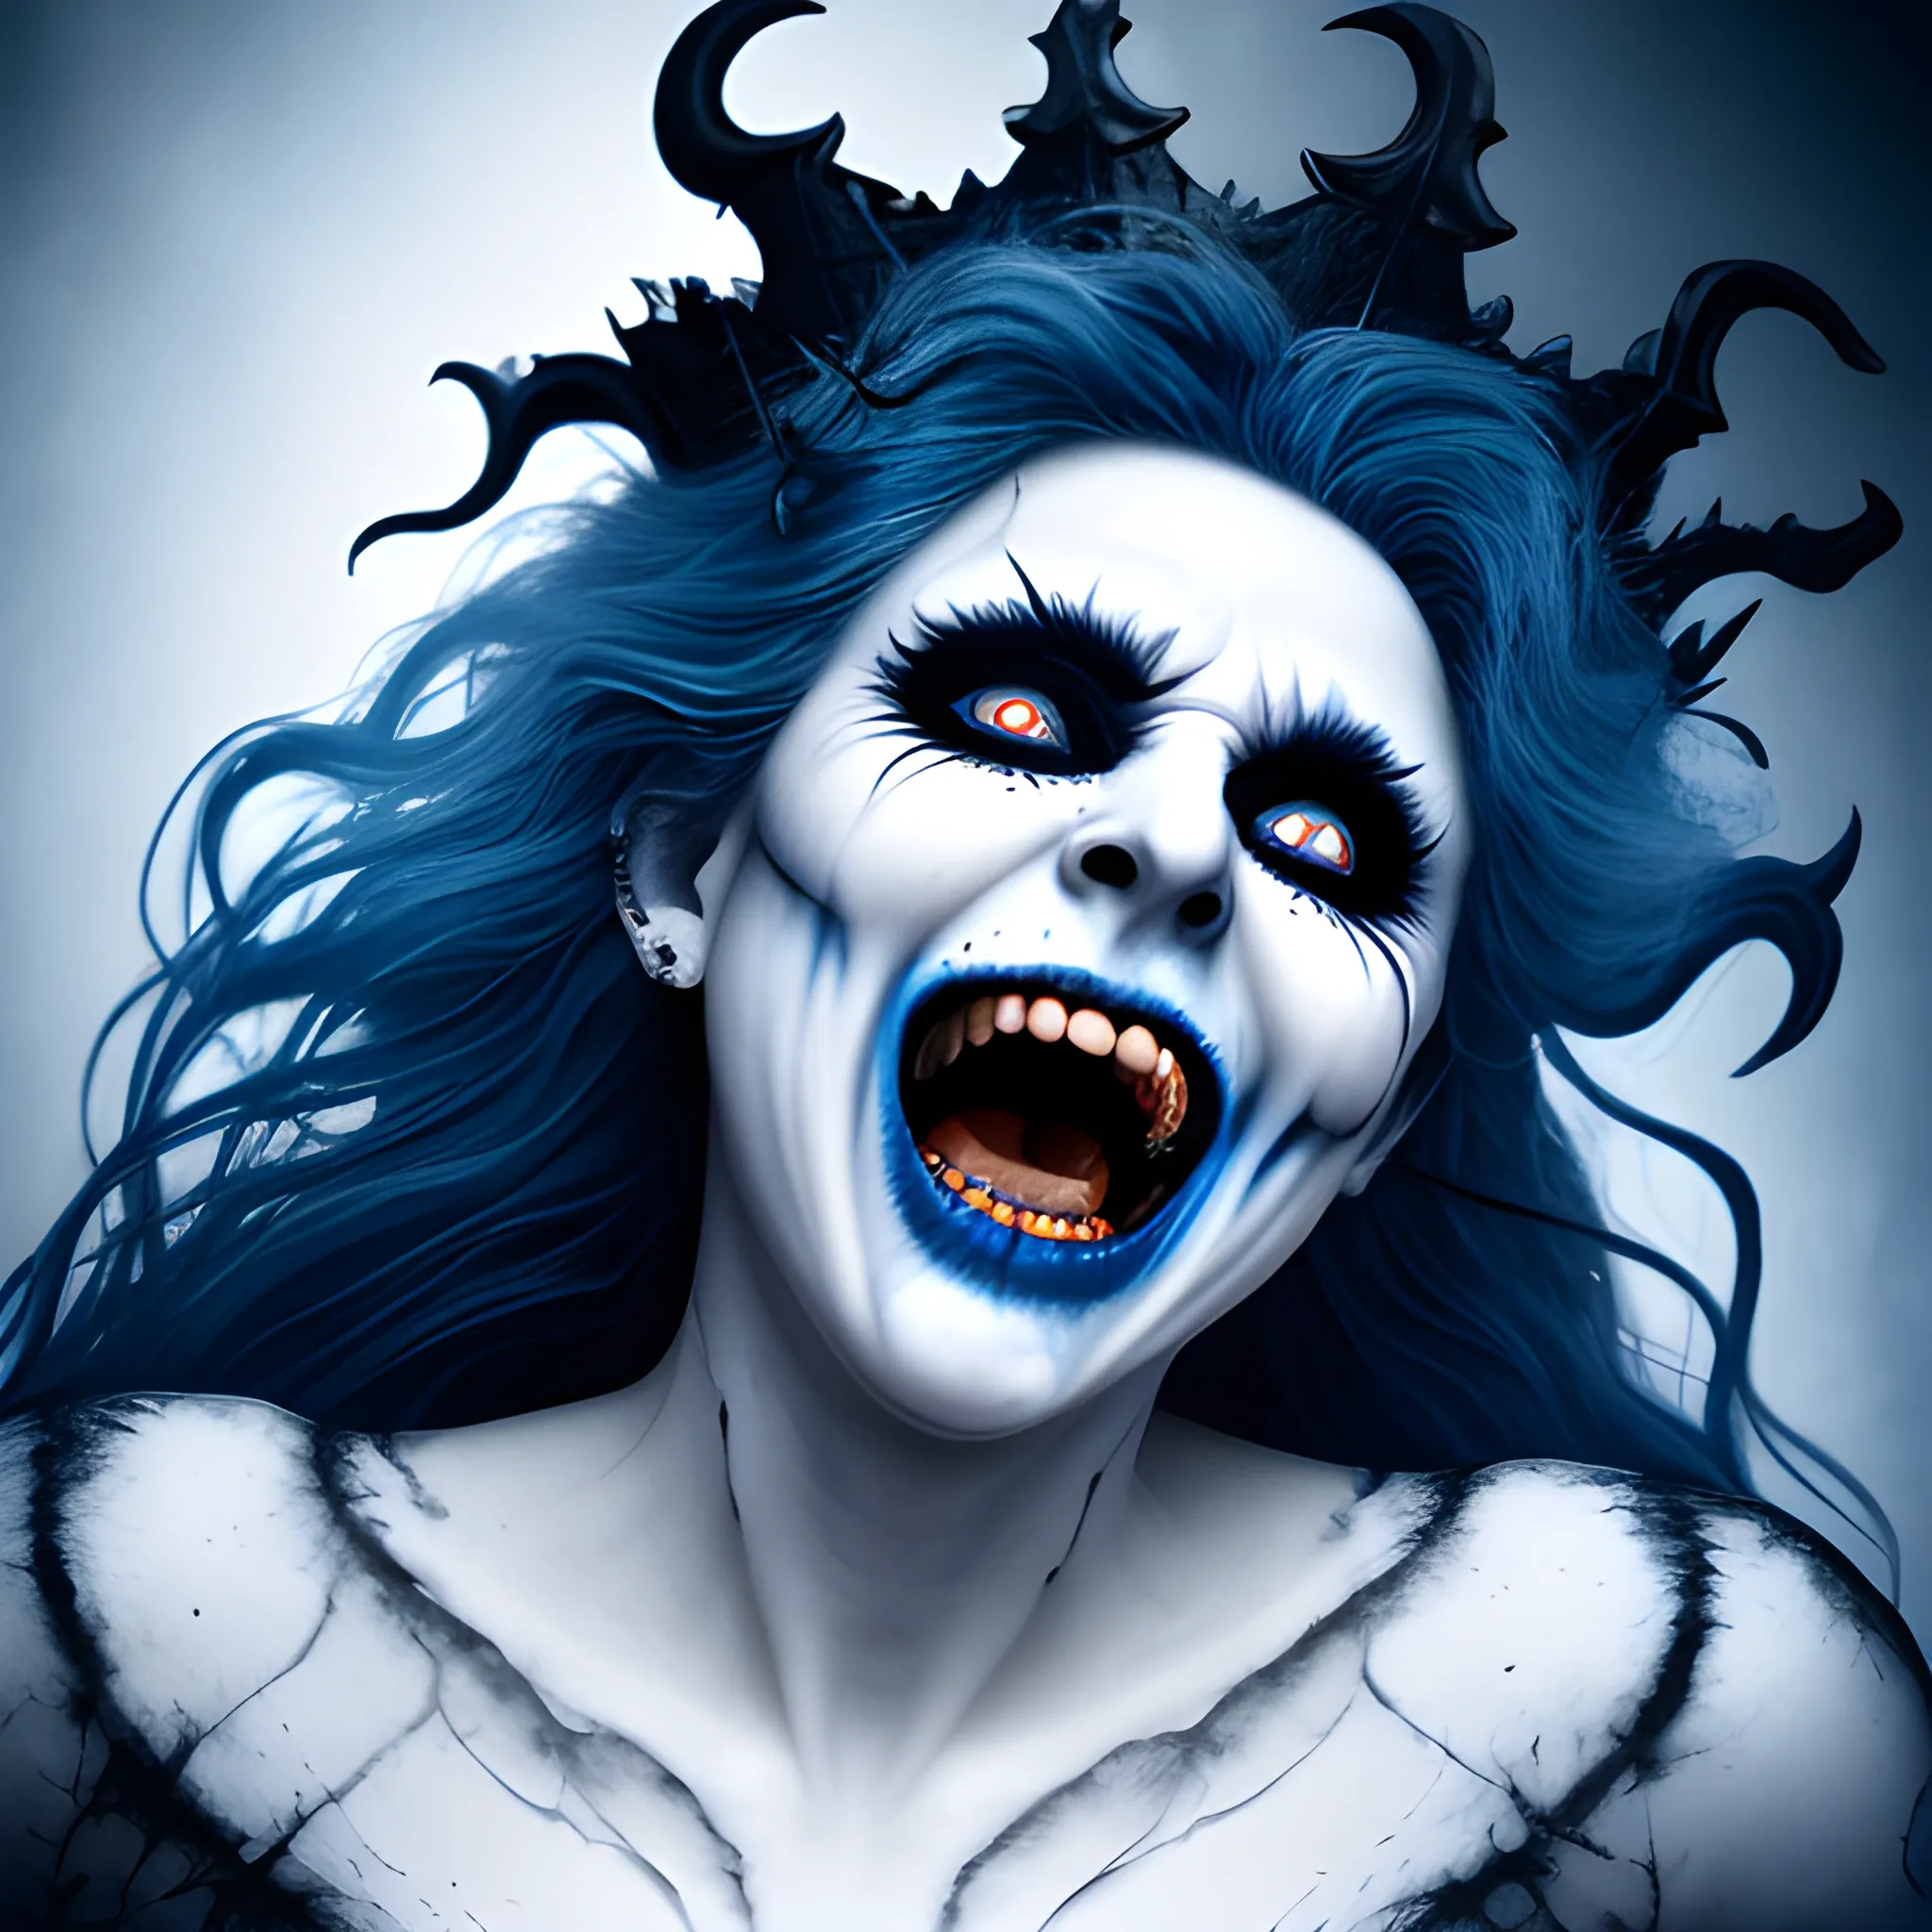 photorealistic image of the king of ghosts screaming with a black crown, full body, ominous smile, dimmed lighting, blue painted hair, white makeup, evil grin, bokeh lighting